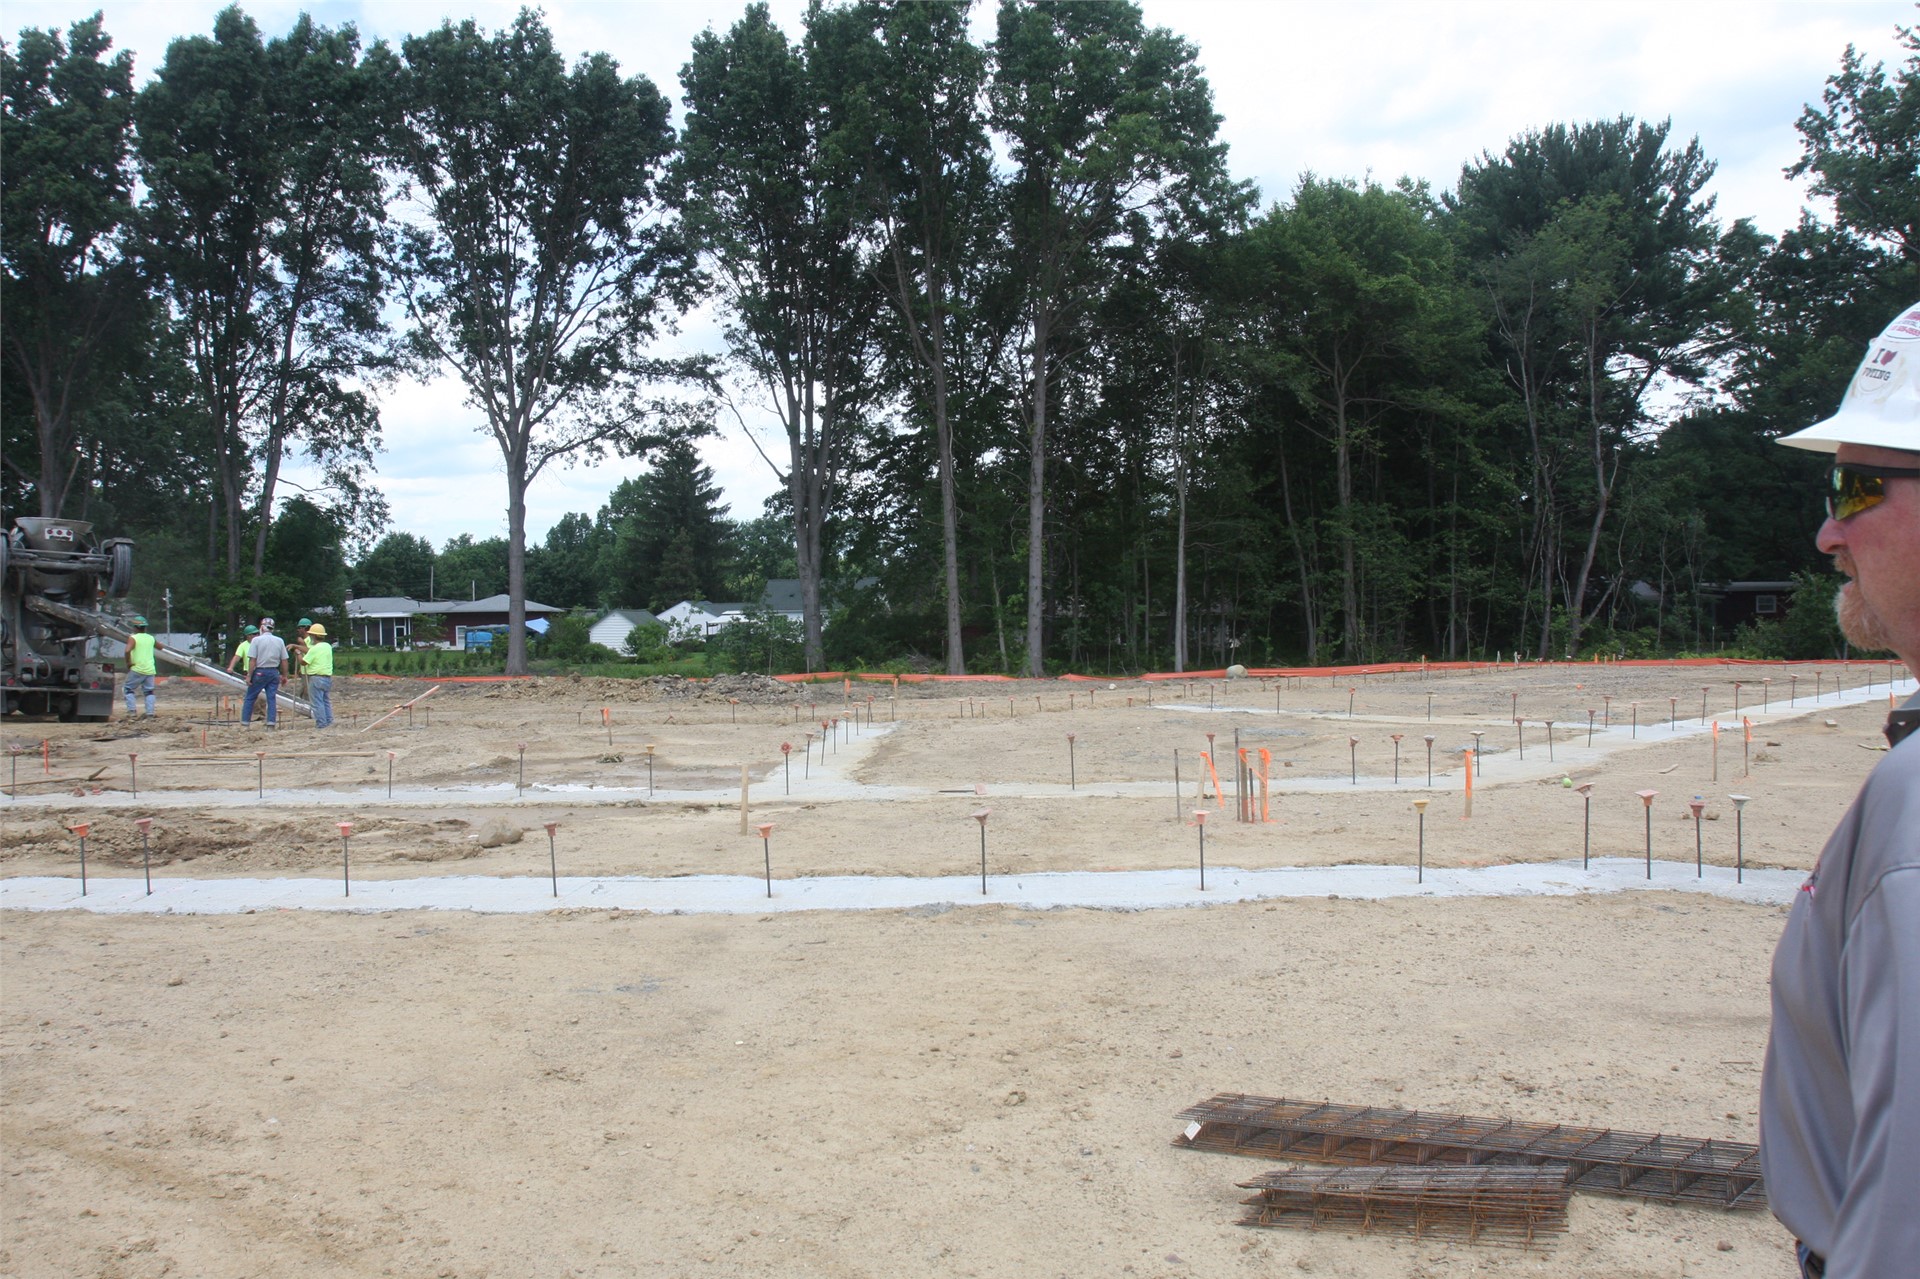 Footers outline where walls will exist in the academic wing